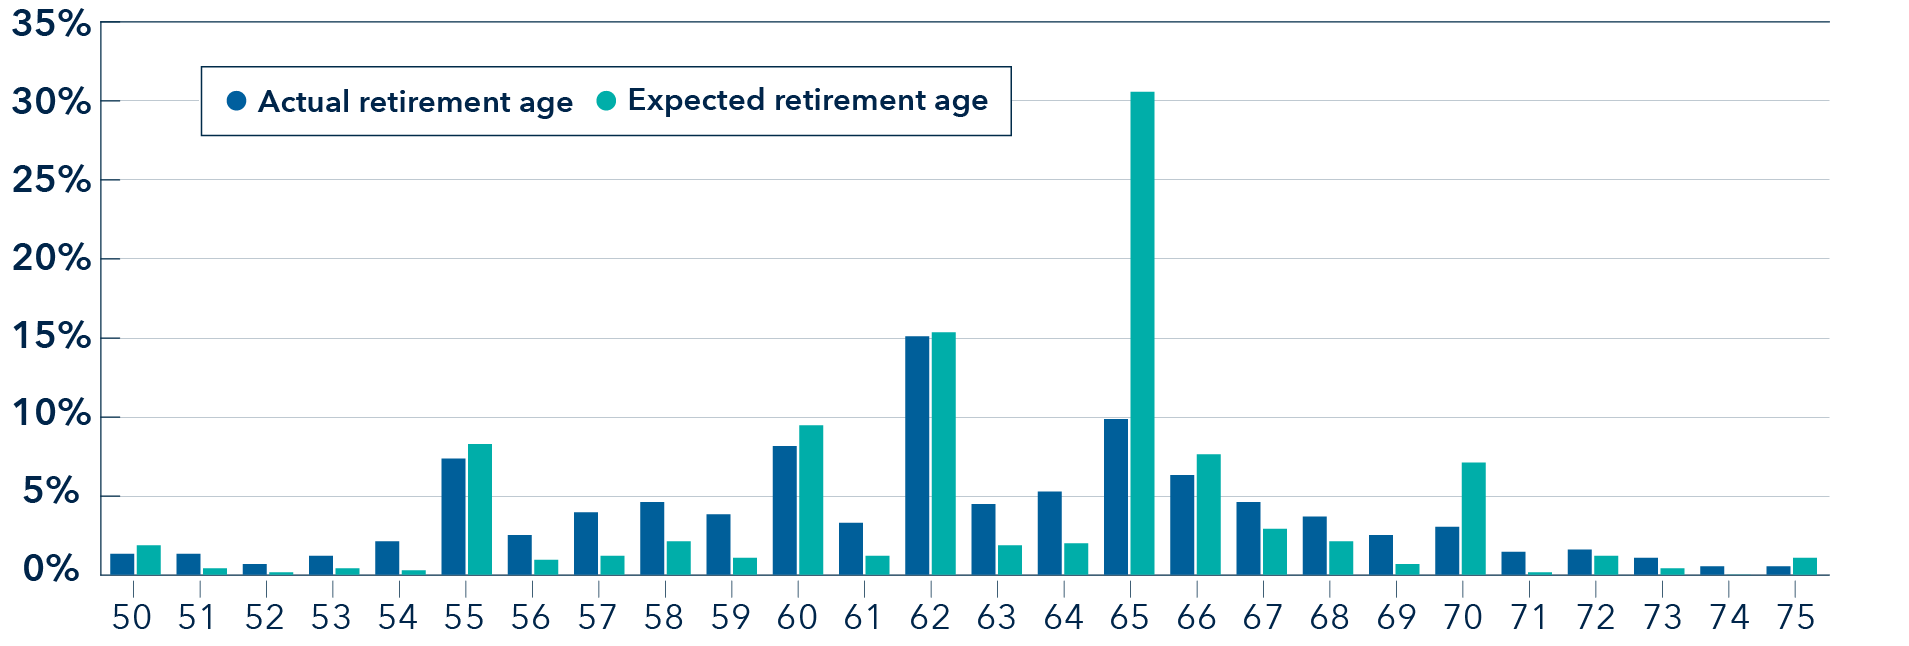 This column chart is a distribution of the percentage of surveyed investors who actually retired versus the percentage who expected to retire at ages spanning from 50 to 75. Actual retirement age is represented by blue bars, while expected retirement age is represented by teal bars. Age 50: 1.8% retired, versus 1.3% who expected to retire. Age 51: 0.4% retired, versus 1.3% who expected to retire. Age 52: 0.1% retired, versus 0.7% who expected to retire. Age 53: 0.4% retired, versus 1.2% who expected to retire. Age 54: 0.3% retired, versus 2.1% who expected to retire. Age 55: 8.3% retired, versus 7.3% who expected to retire. Age 56: 0.9% retired, versus 2.5% who expected to retire. Age 57: 1.2% retired, versus 3.9% who expected to retire. Age 58: 2.1% retired, versus 4.6% who expected to retire. Age 59: 1.0% retired, versus 3.8% who expected to retire. Age 60: 9.4% retired, versus 8.1% who expected to retire. Age 61: 1.2% retired, versus 3.3% who expected to retire. Age 62: 15.4% retired, versus 15.1% who expected to retire. Age 63: 1.8% retired, versus 4.5% who expected to retire. Age 64: 2.0% retired, versus 5.2% who expected to retire. Age 65: 30.6% retired, versus 9.8% who expected to retire. Age 66: 7.6% retired, versus 6.3% who expected to retire. Age 67: 2.9% retired, versus 4.6% who expected to retire. Age 68: 2.1% retired, versus 3.7% who expected to retire. Age 69: 0.7% retired, versus 2.5% who expected to retire. Age 70: 7.1% retired, versus 3.0% who expected to retire. Age 71: 0.1% retired, versus 1.4% who expected to retire. Age 72: 1.2% retired, versus 1.6% who expected to retire. Age 73: 0.4% retired, versus 1.0% who expected to retire. Age 74: 0.0% retired, versus 0.5% who expected to retire. Age 75: 1.0% retired, versus 0.5% who expected to retire. 